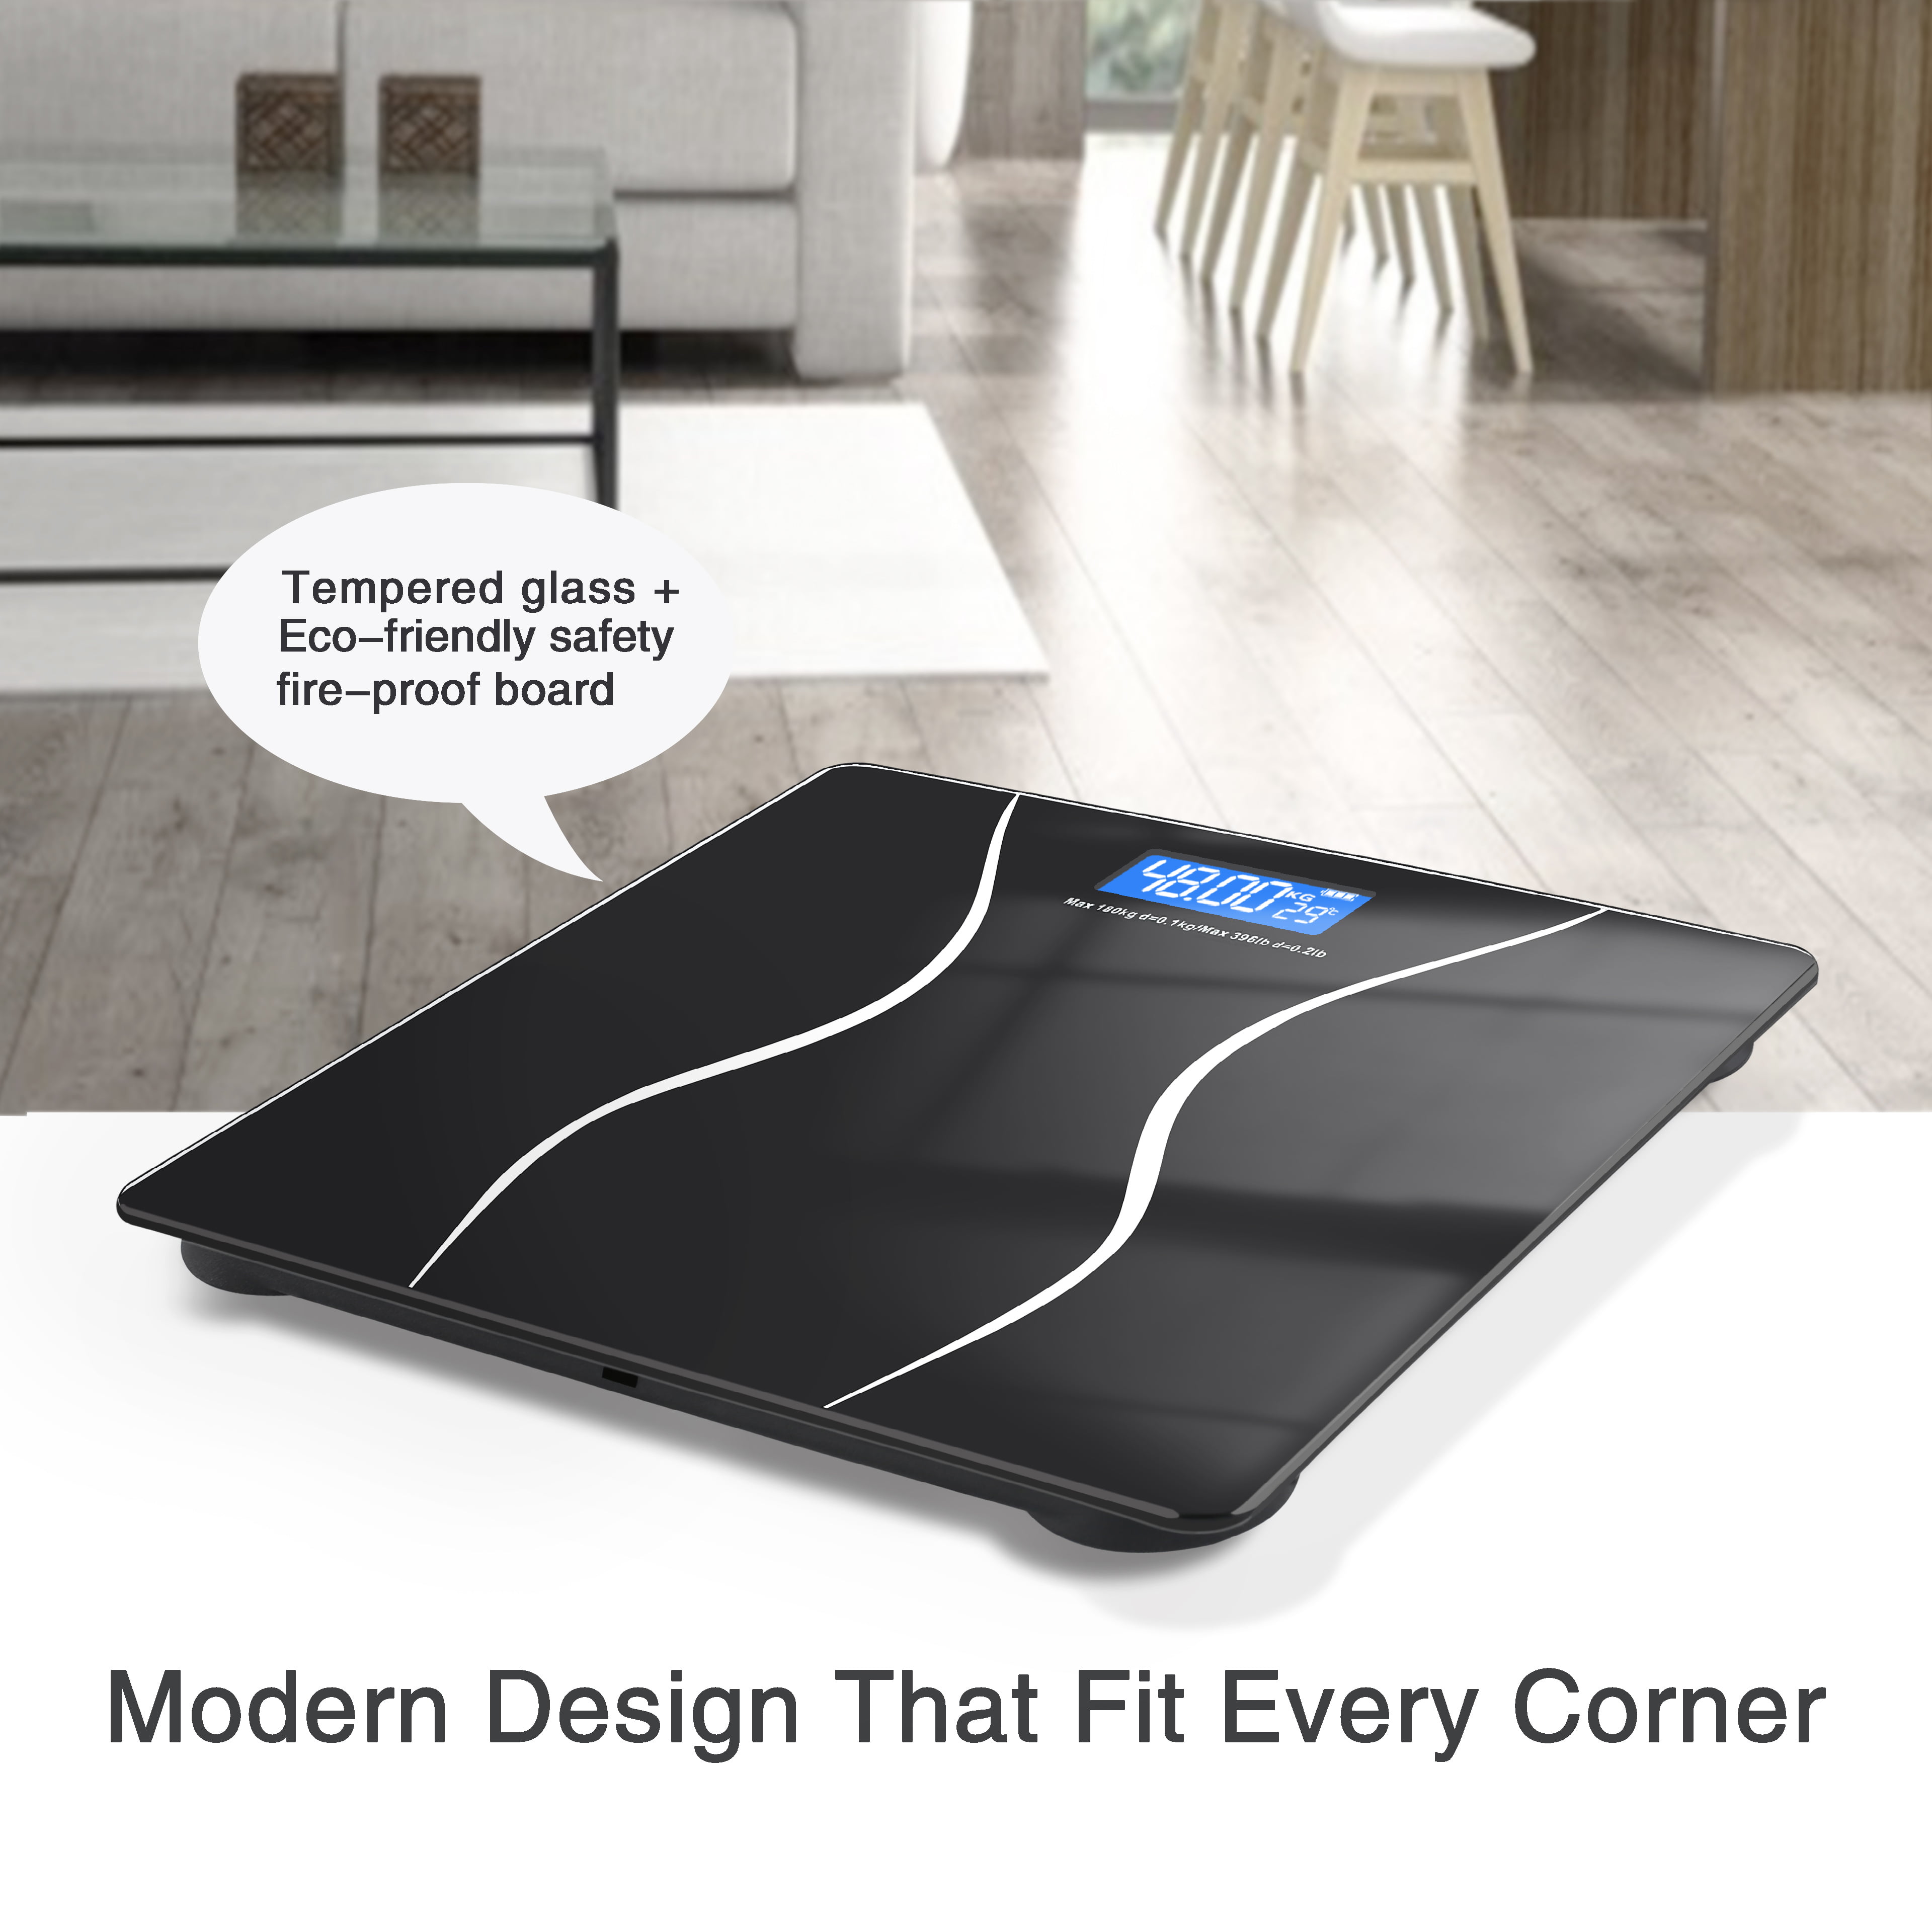 Digital Body weight Scale Household Floor Body Scales Black Battery Powered  Tempered Glass Digital Bathroom Scale